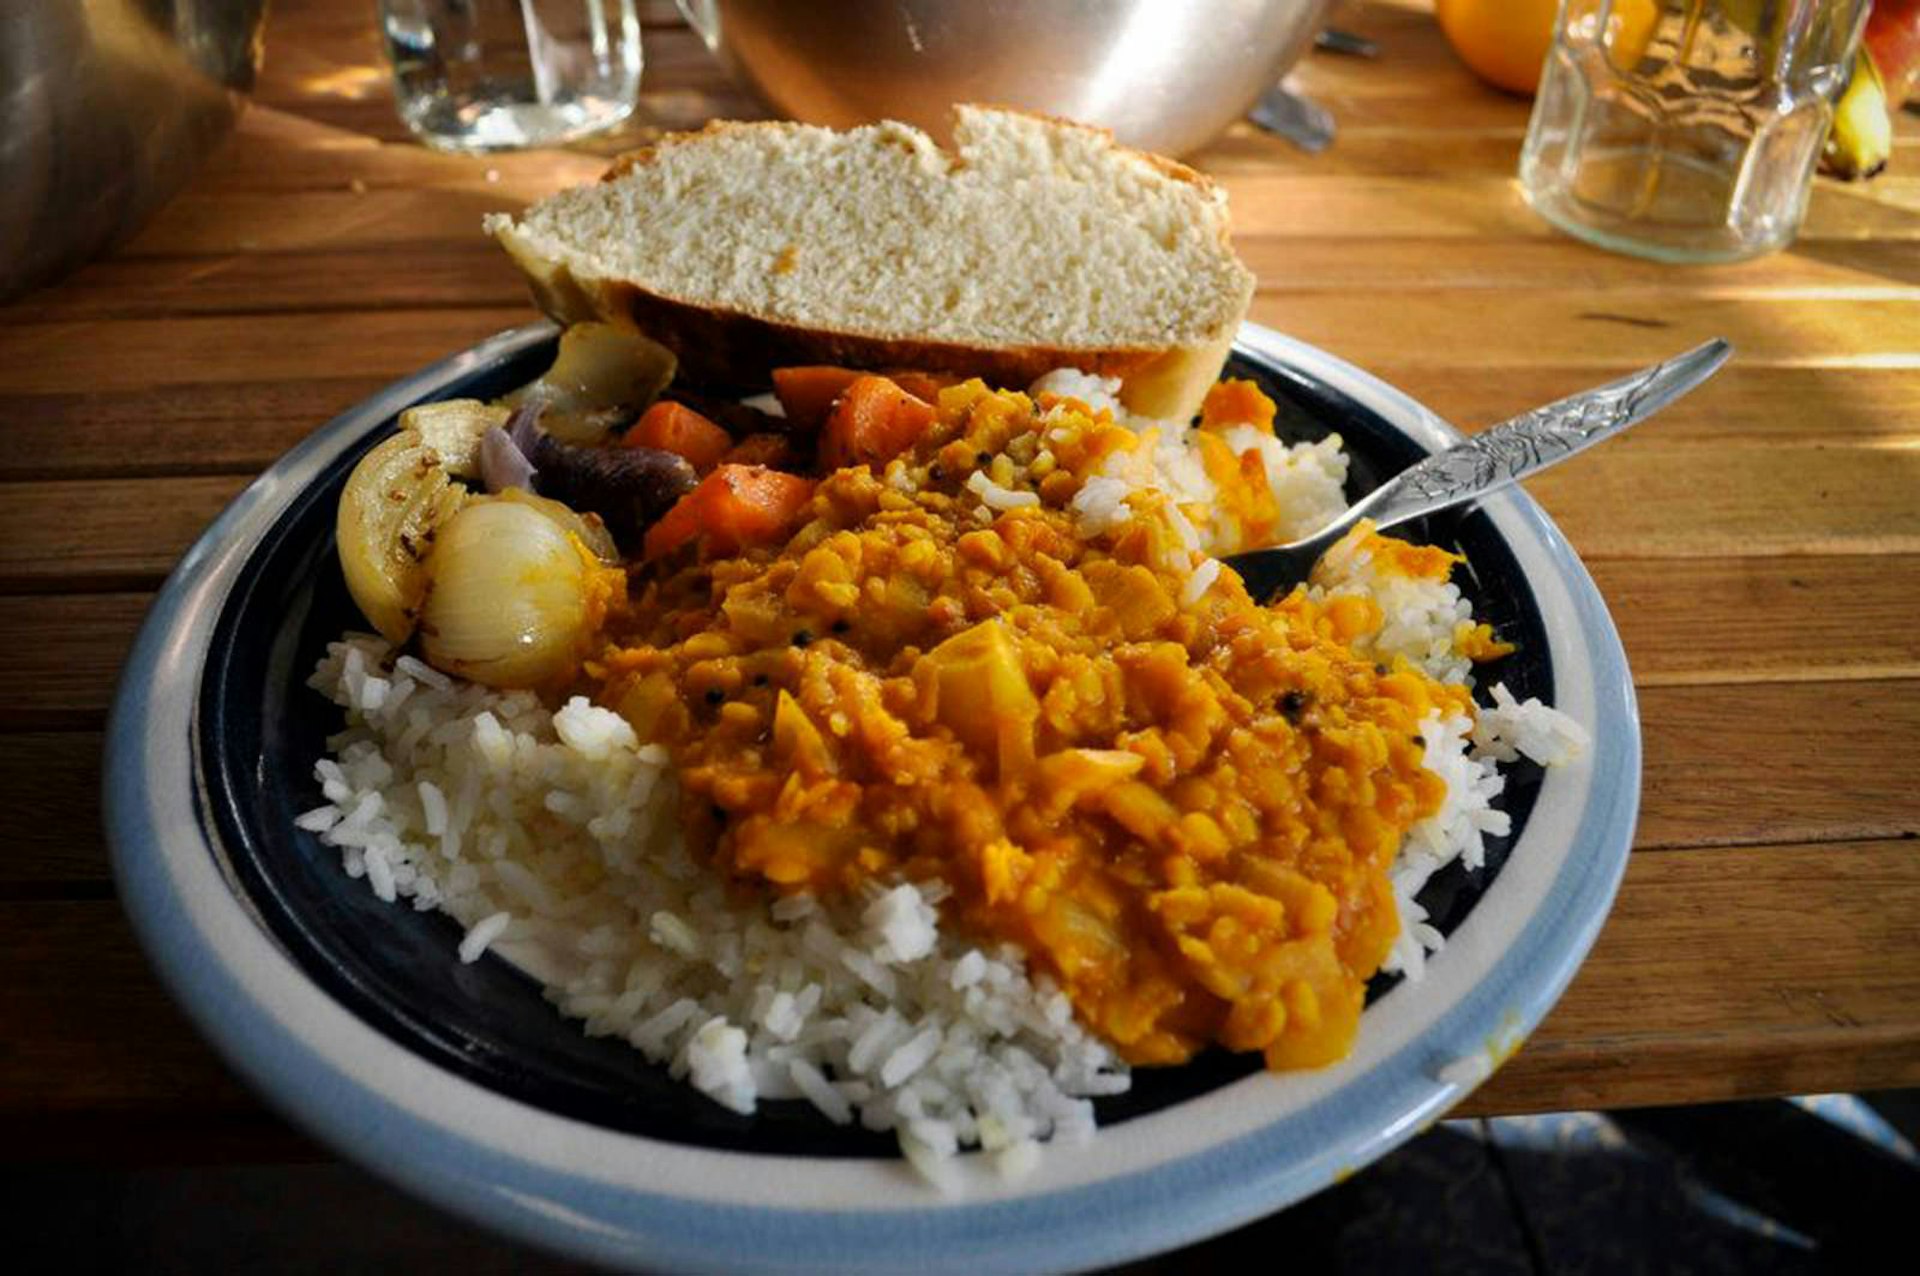 A plate of vegetable curry at the Food Co-op Shop, Canberra © Food Co-op Shop